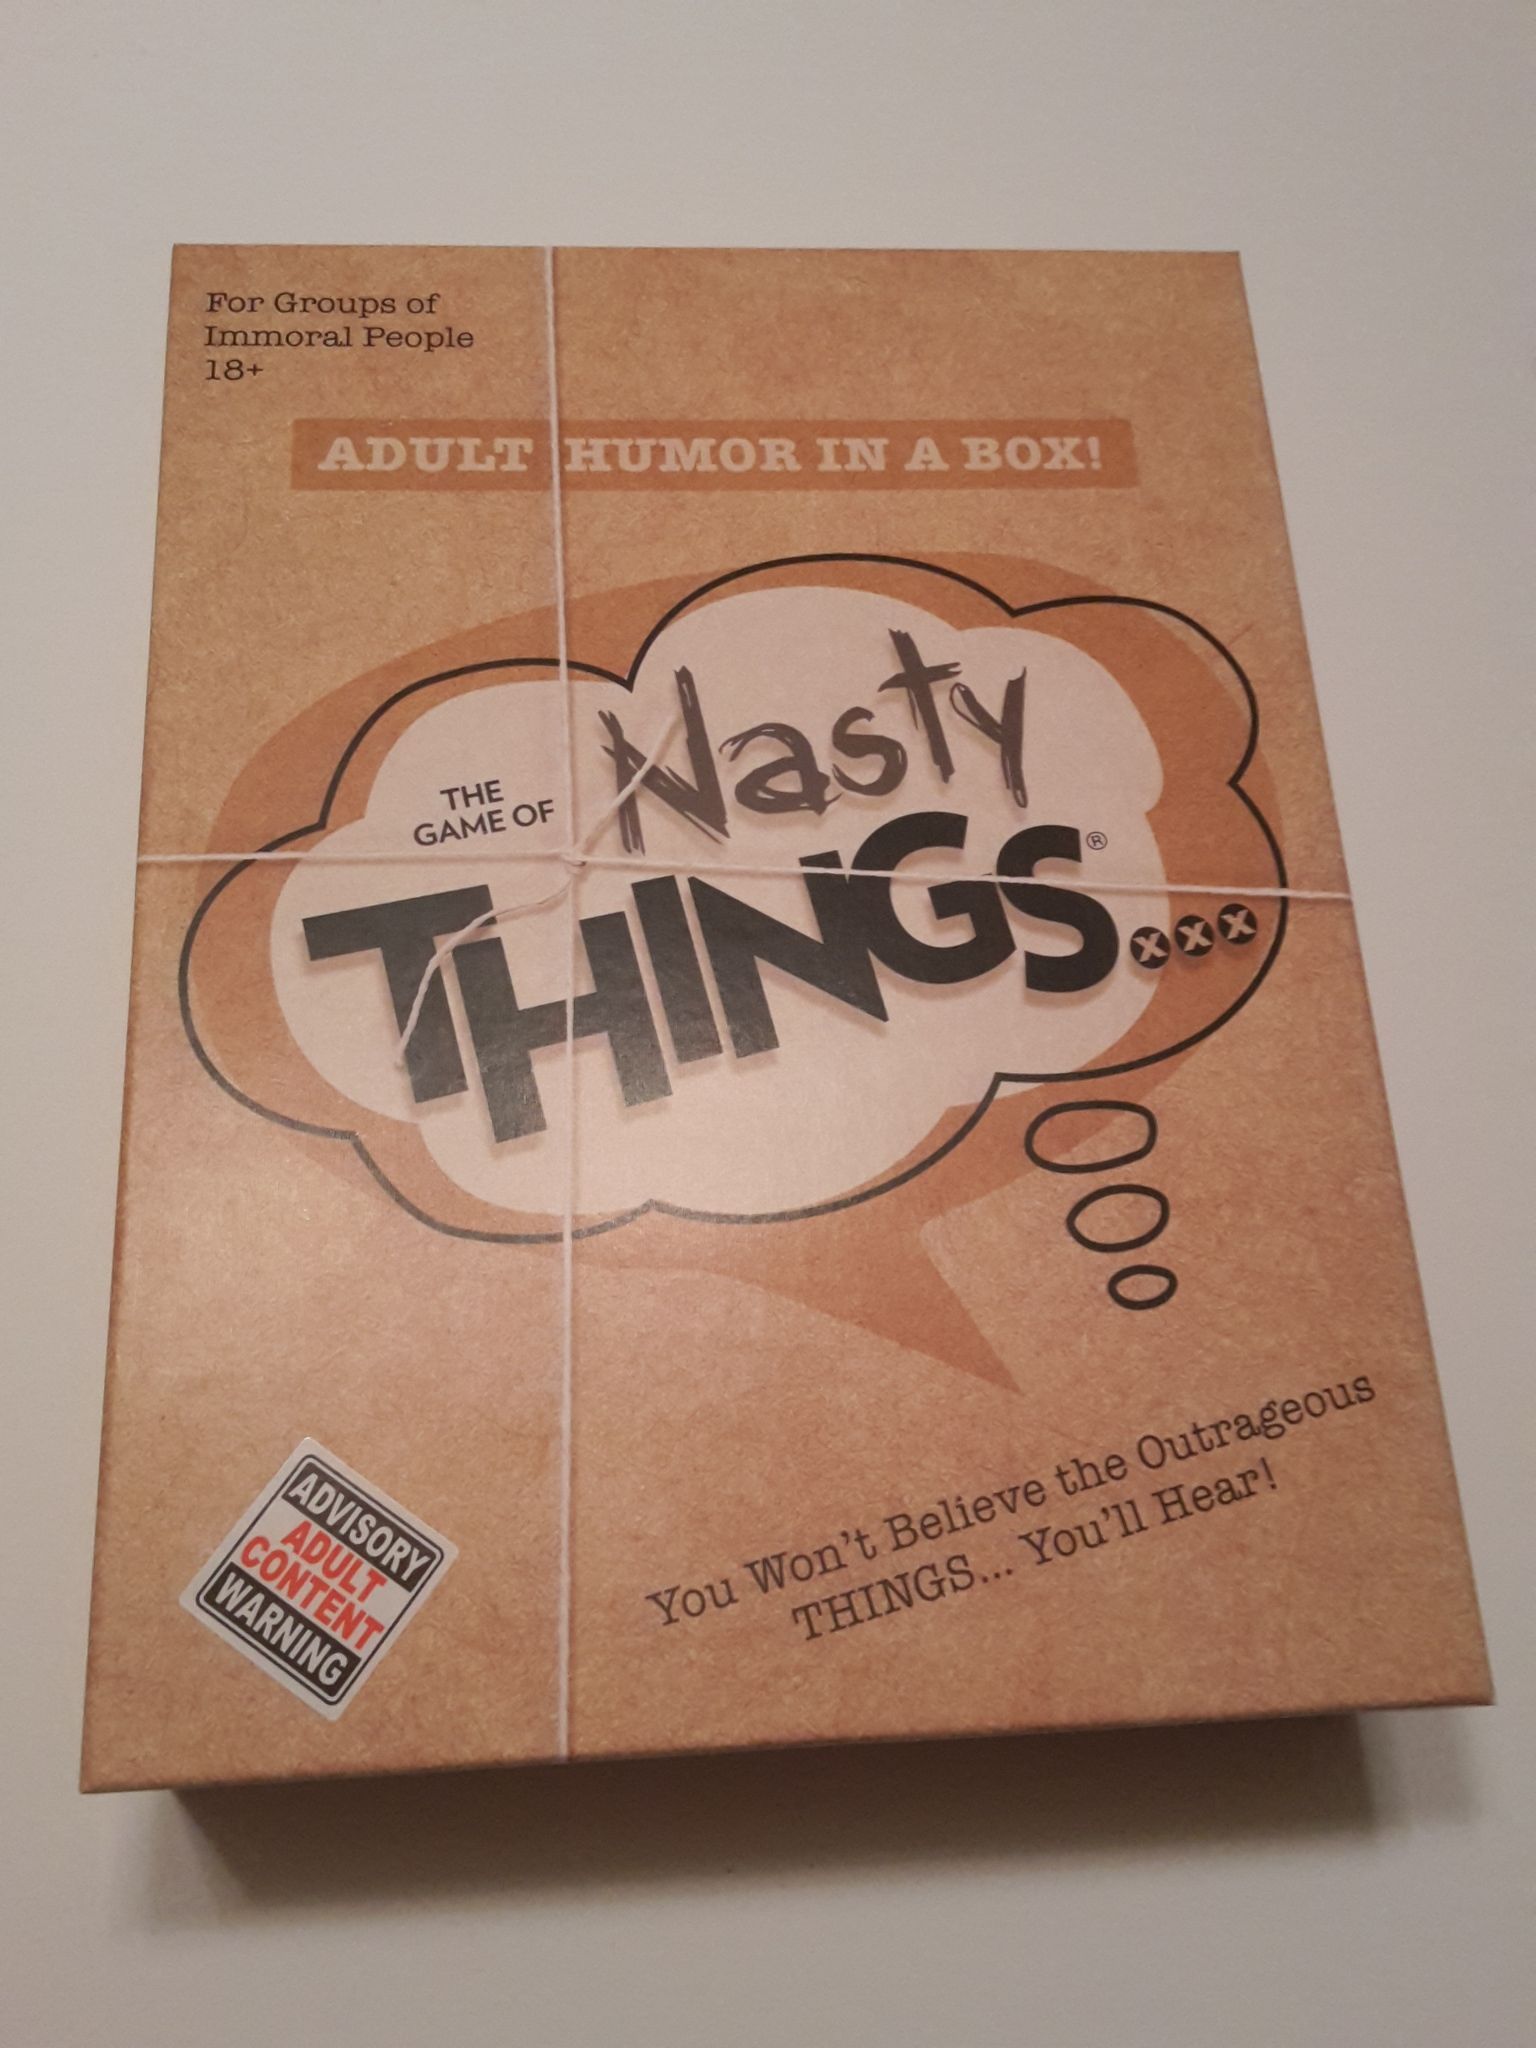 The Game of Nasty Things...